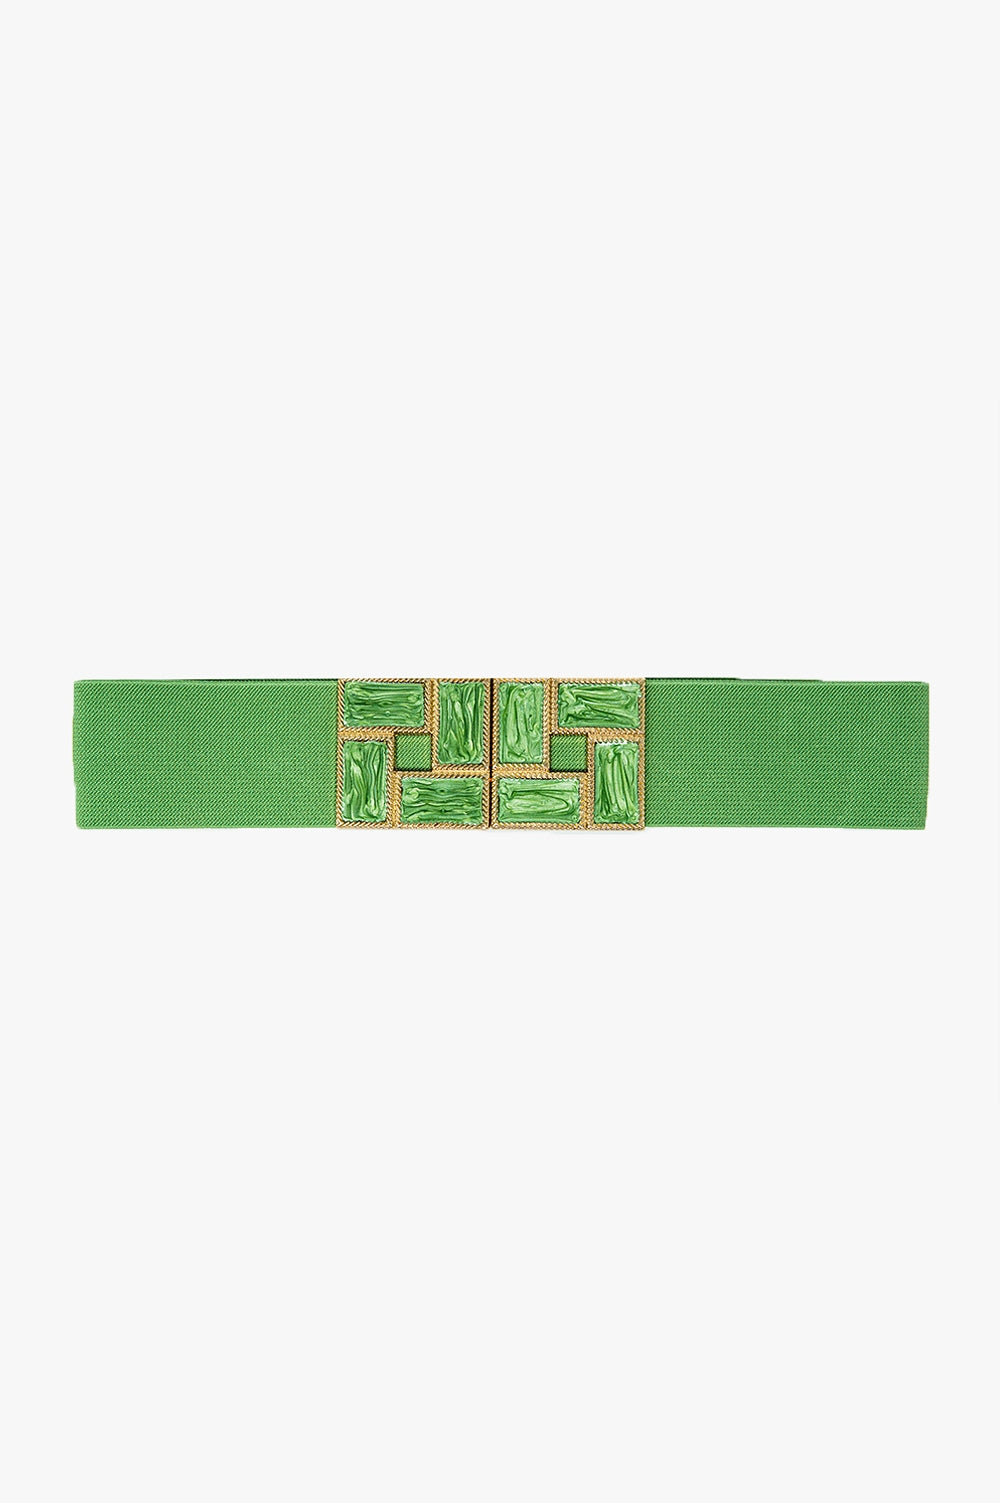 Green Elastic Belt with Squared Marbled Buckles and Gold Details